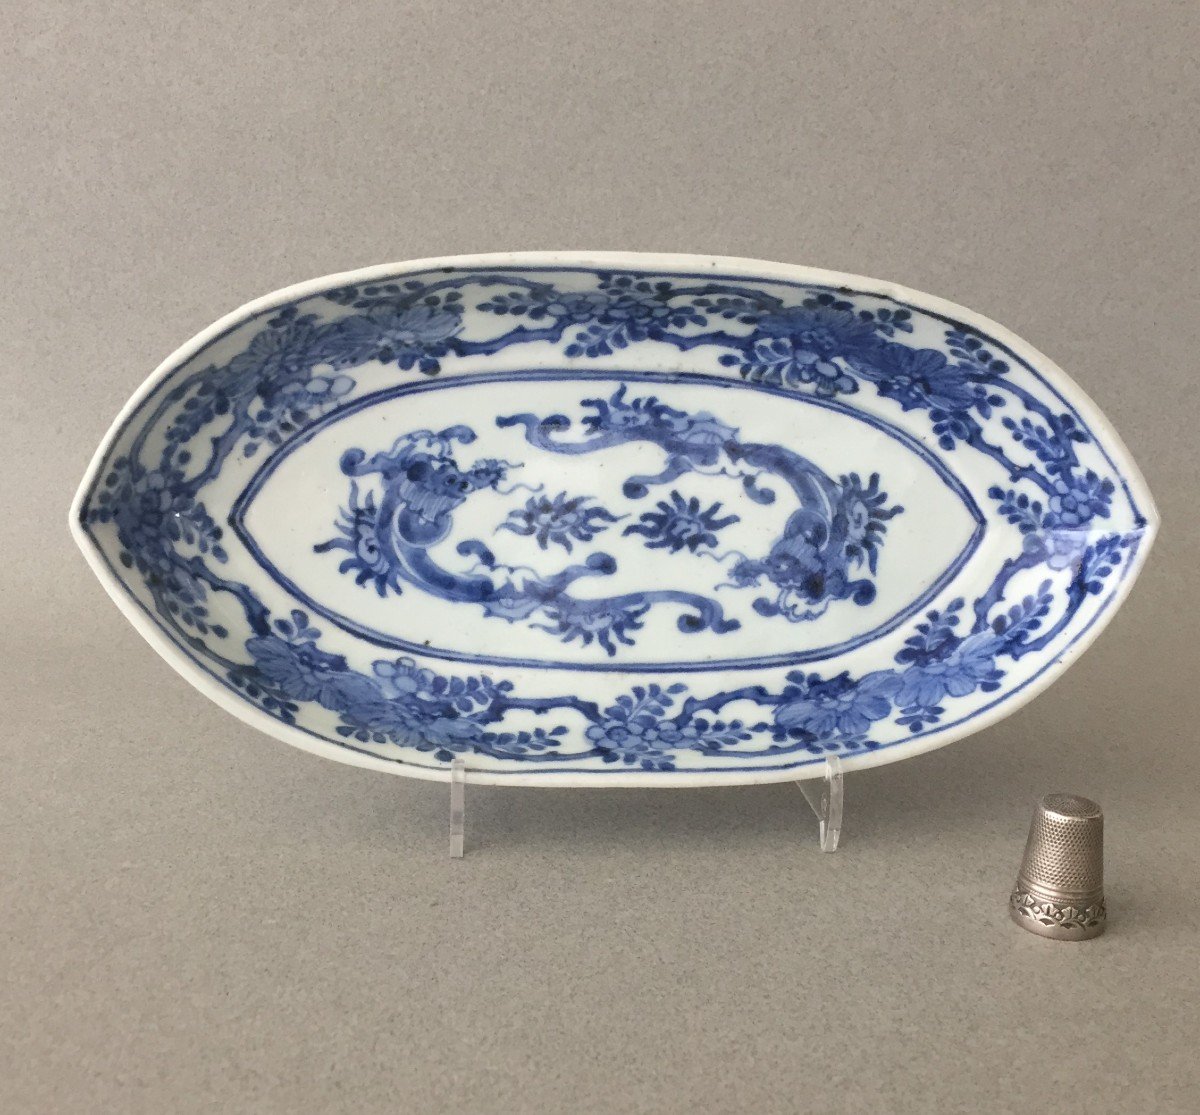 Japan :  Blue And White Oval Dish 1690 - 1740